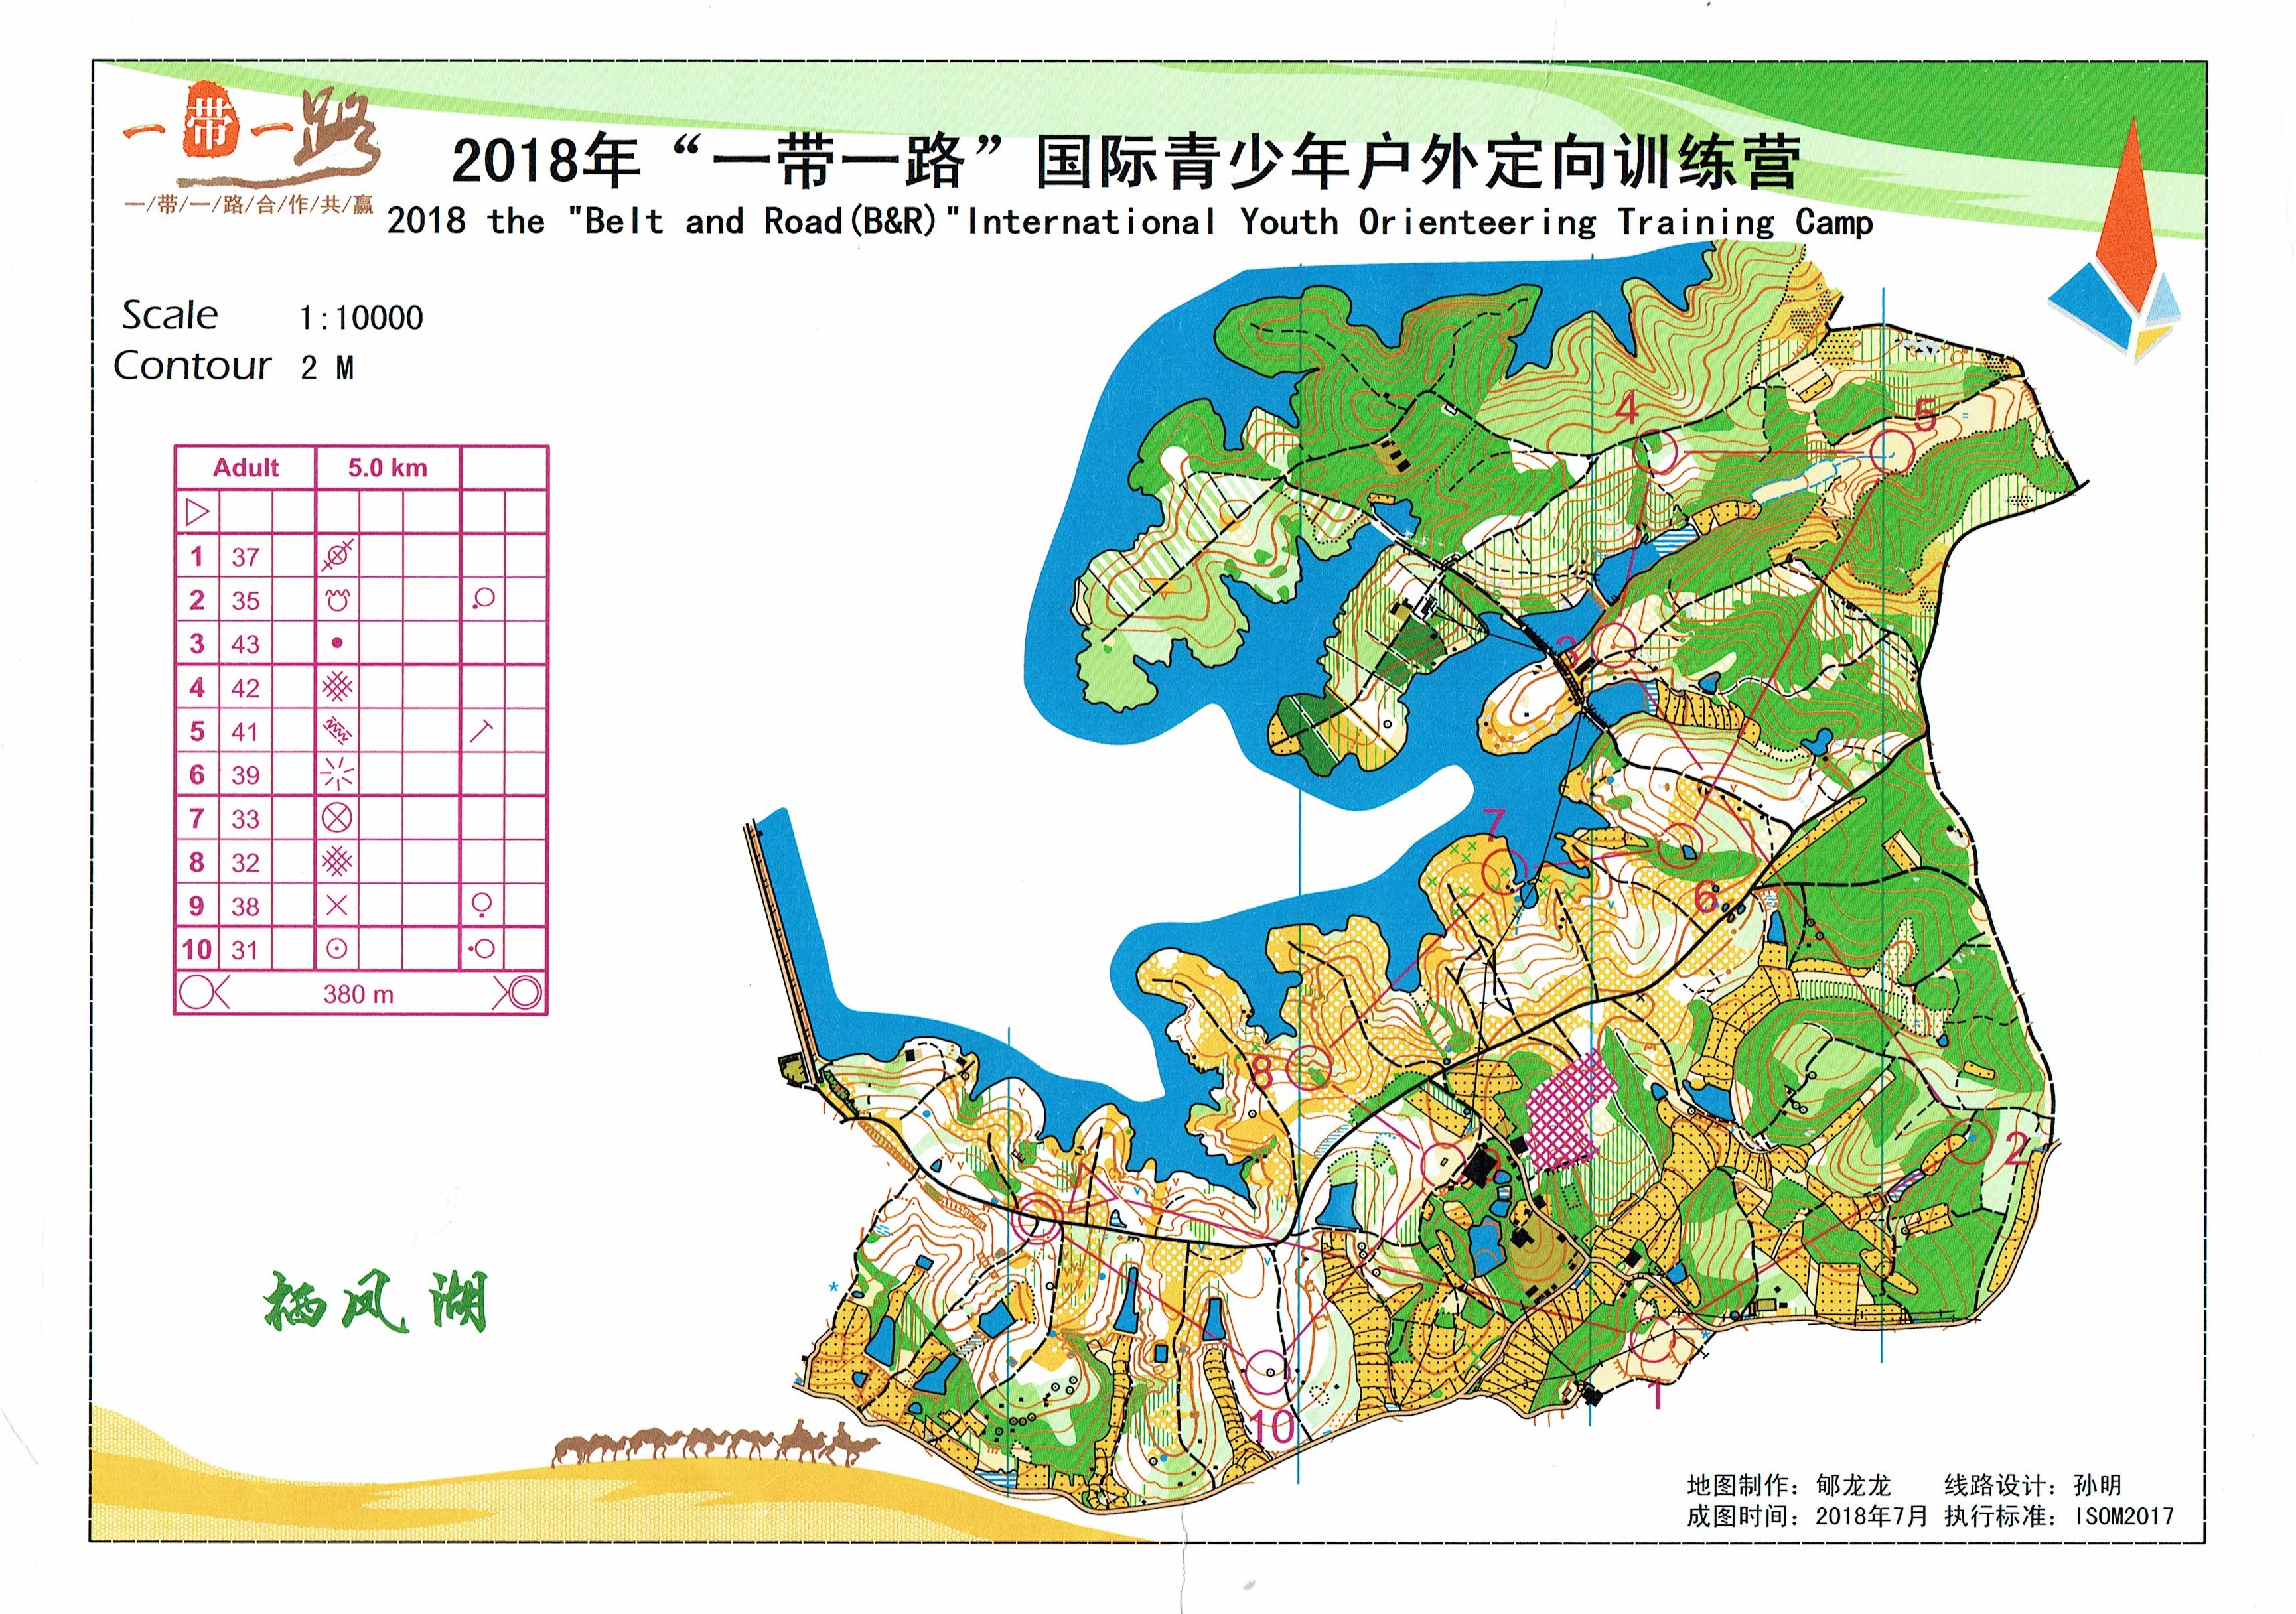 Belt and Road International Youth Orienteering Camp (26-10-2018)